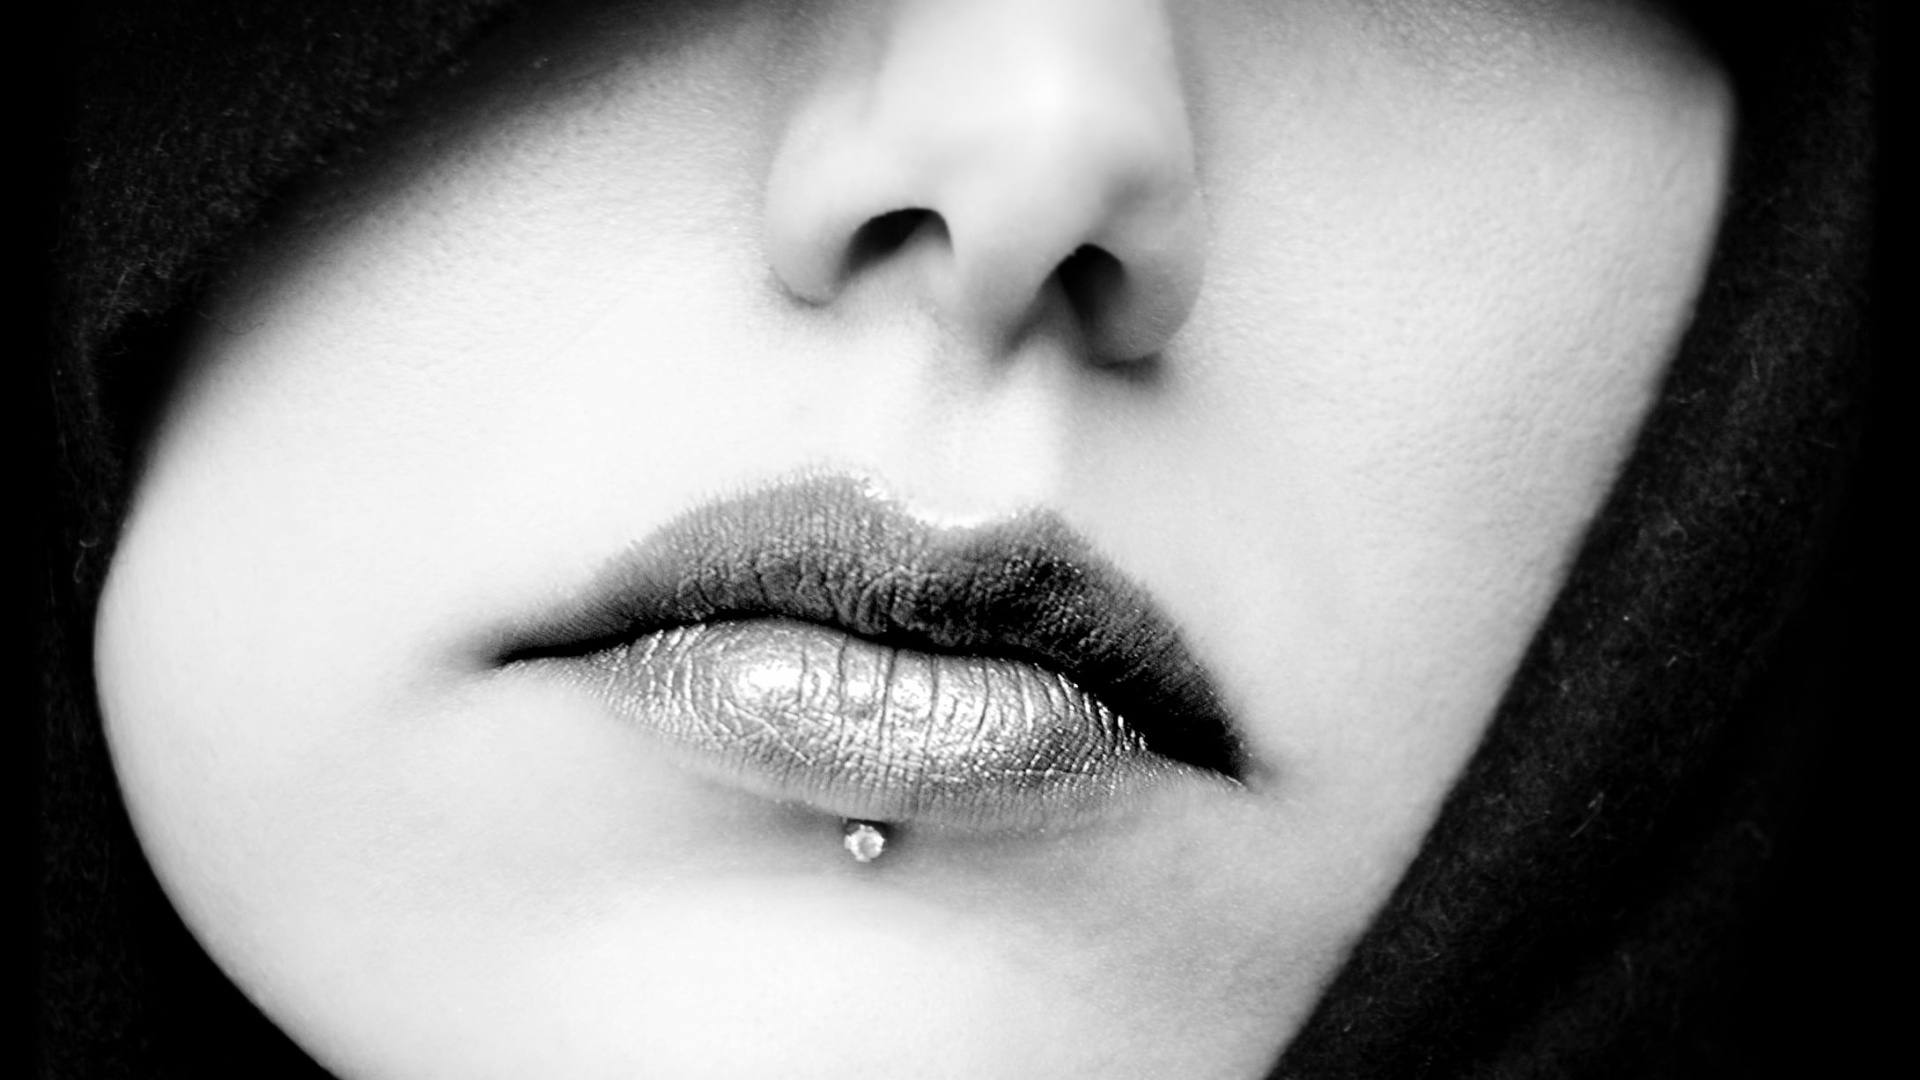 Grayscale photography, Woman with piercing, High-resolution download, 1920x1080 Full HD Desktop